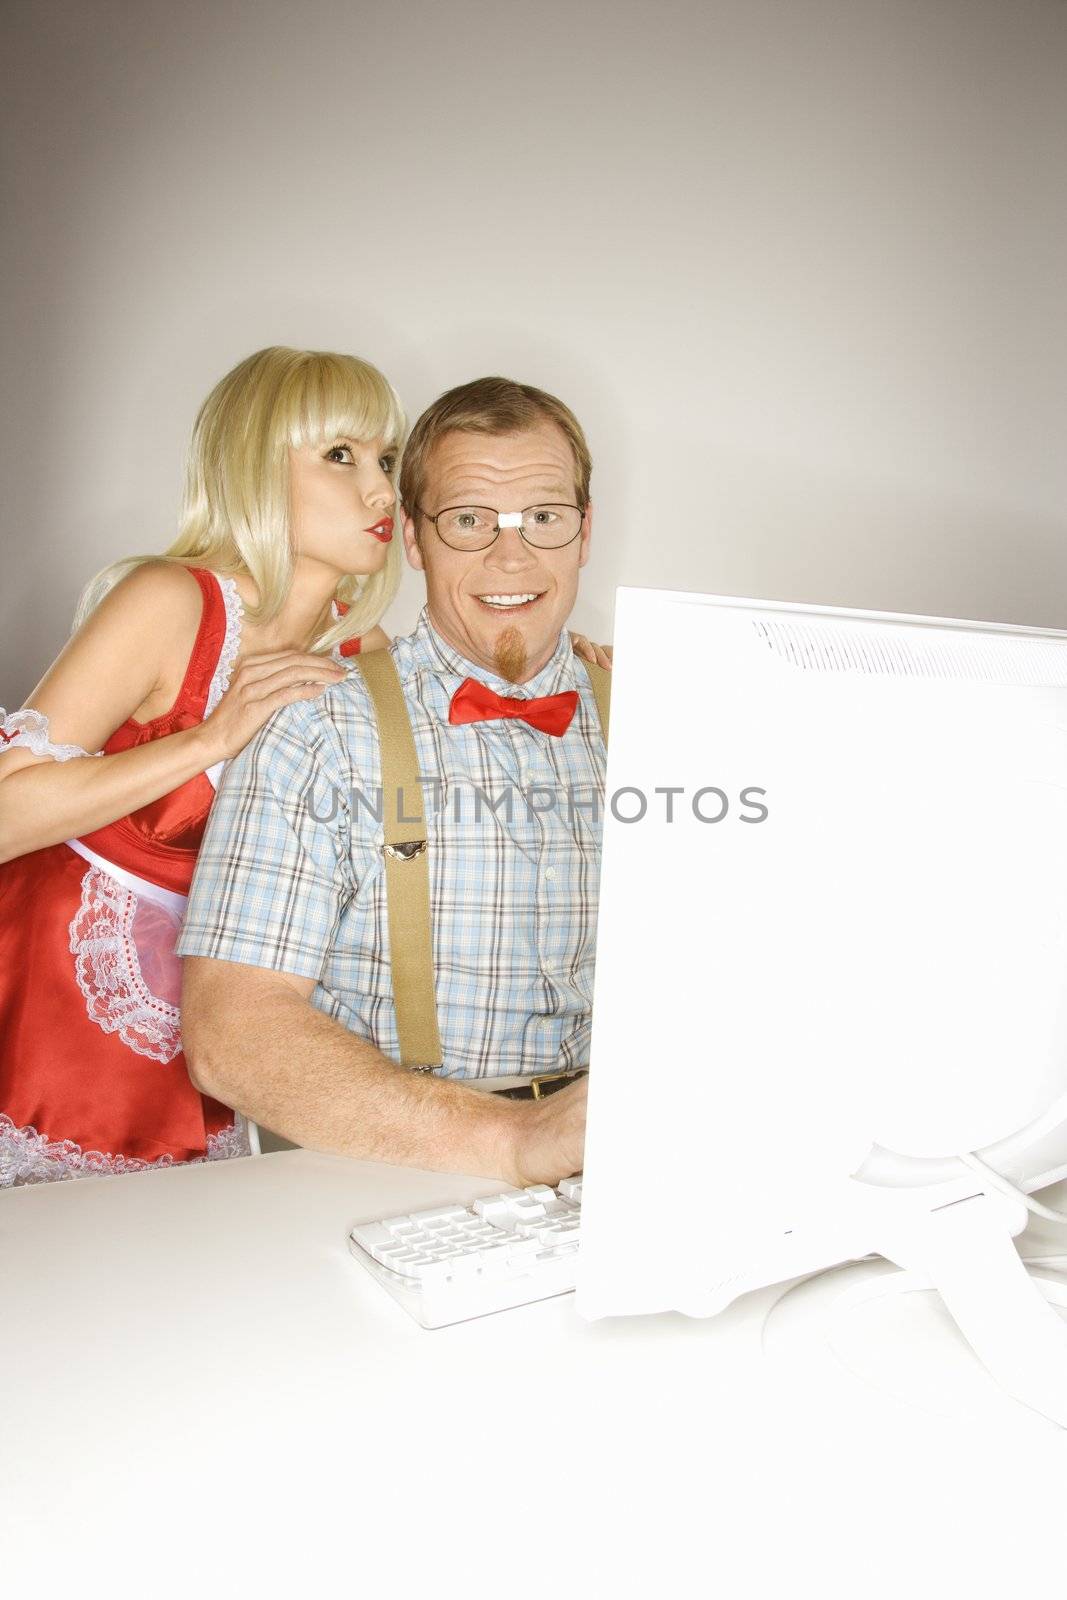 Caucasian young blonde woman dressed in french maid outfit whispering to Caucasian young man sitting behind computer dressed like nerd.